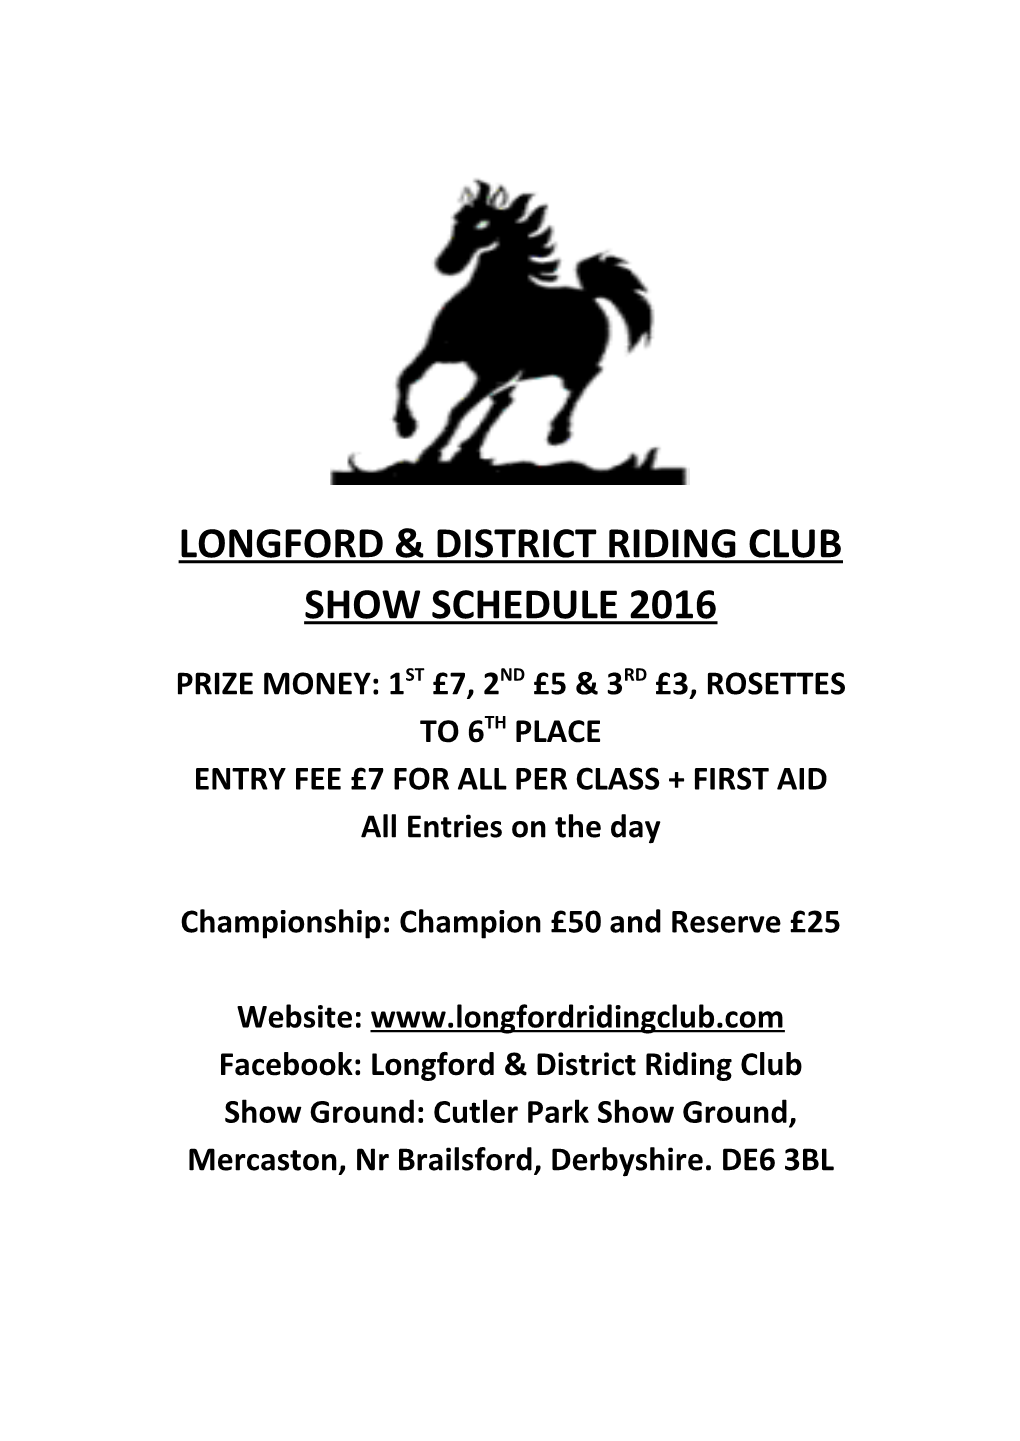 Longford & District Riding Club Show Schedule 2016